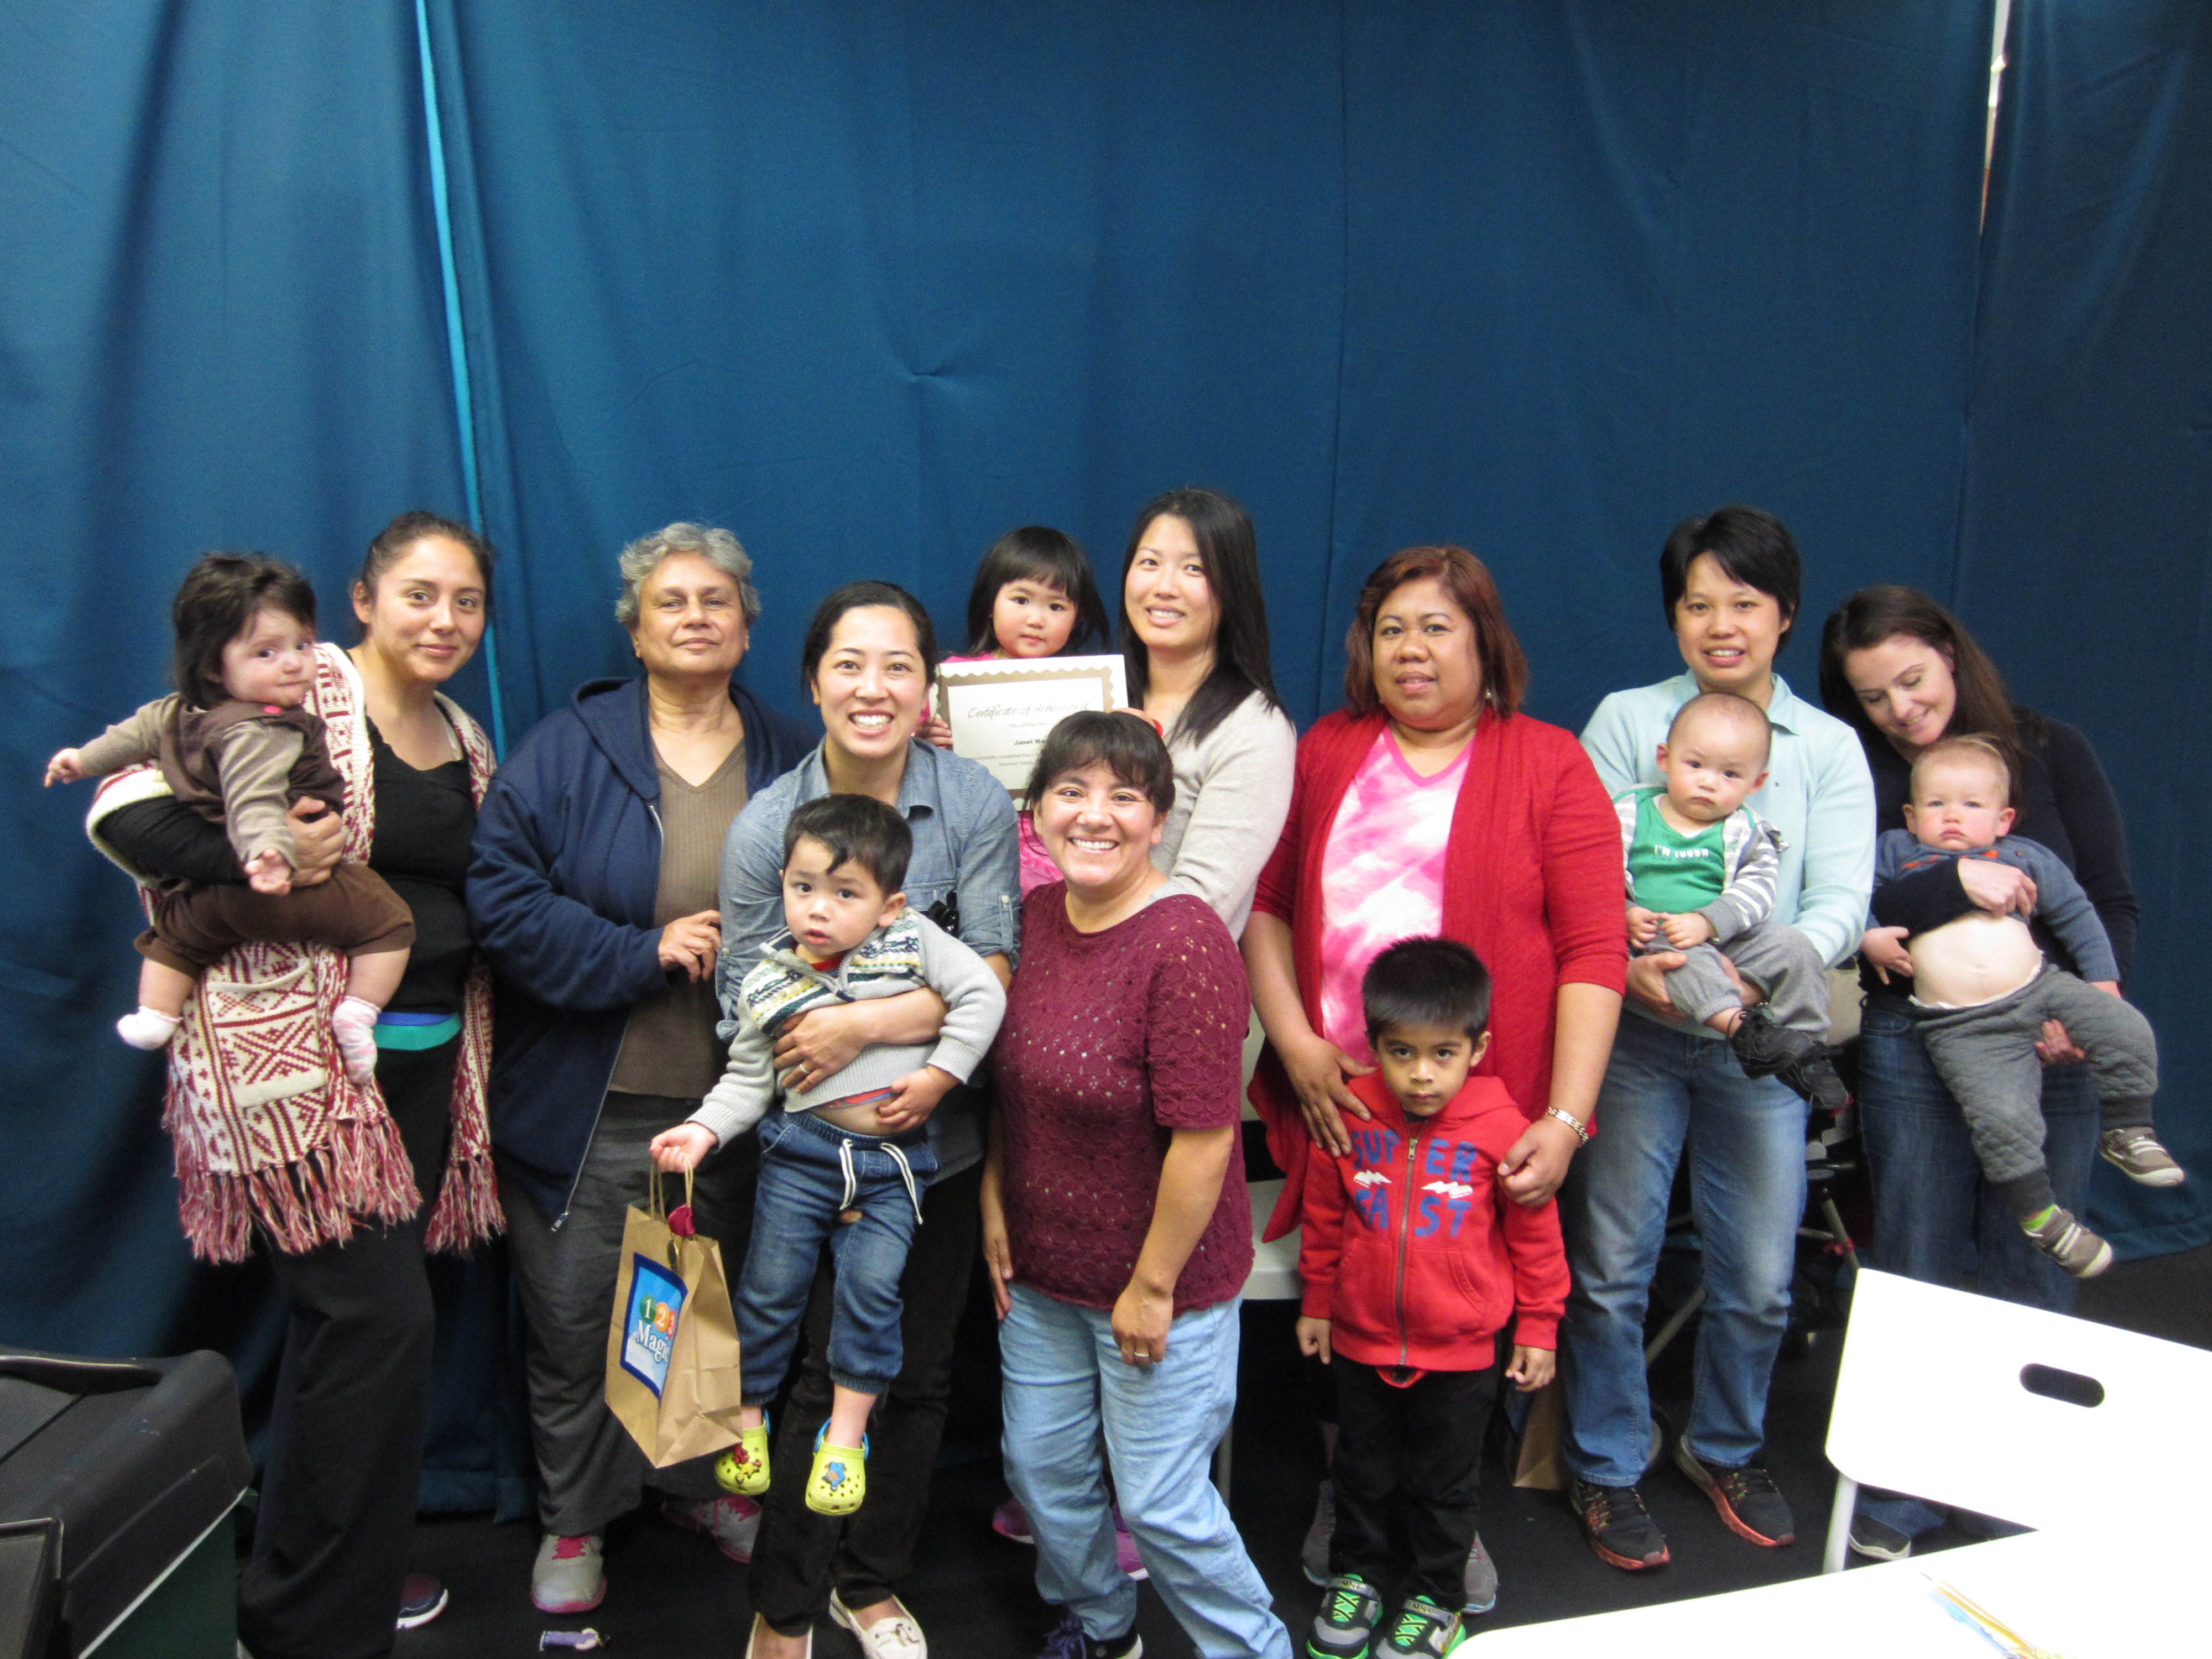 Family Economic Success Series partnership helps immigrant consumers